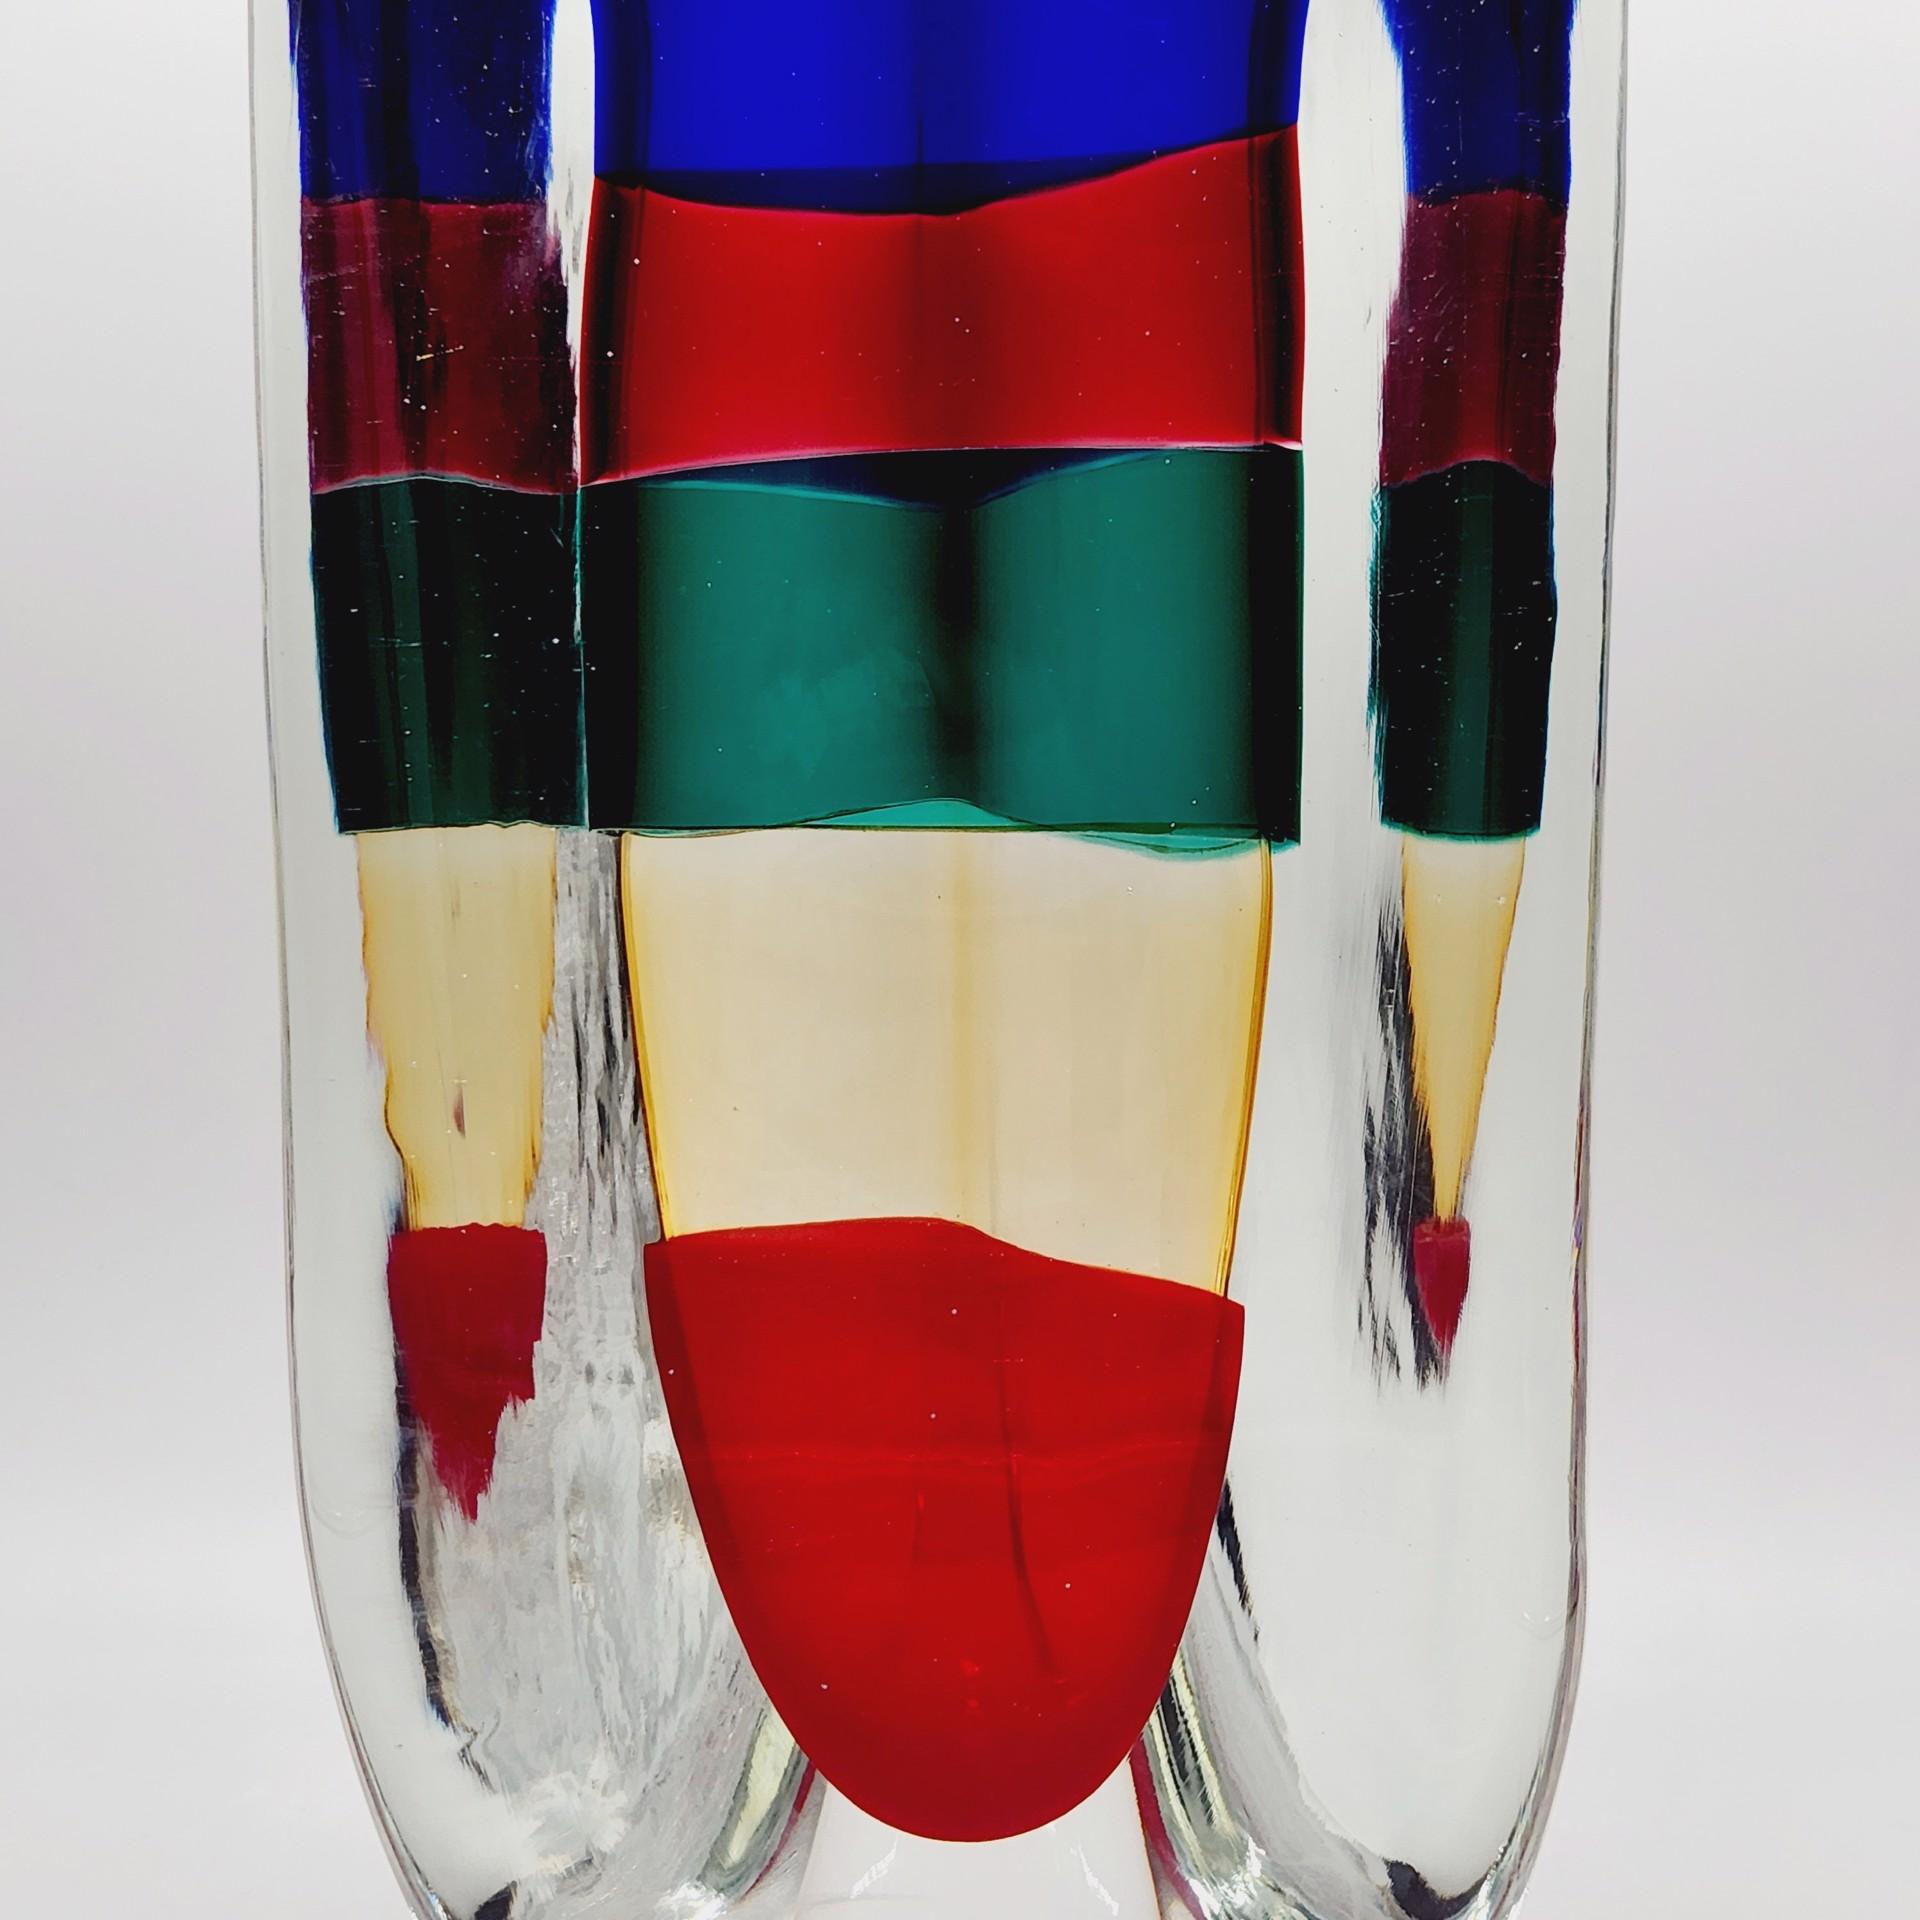 Thick, transparent glass with immersed stripes of red, yellow, blue and green, Fulvio Bianconi for Venini S.p.a., Murano 1991.
Signed, dated, original label and original box.
H. 12.75 x W. 6 x D. 6 in. - Weight: 24.6 lbs.
Like New Condition.
